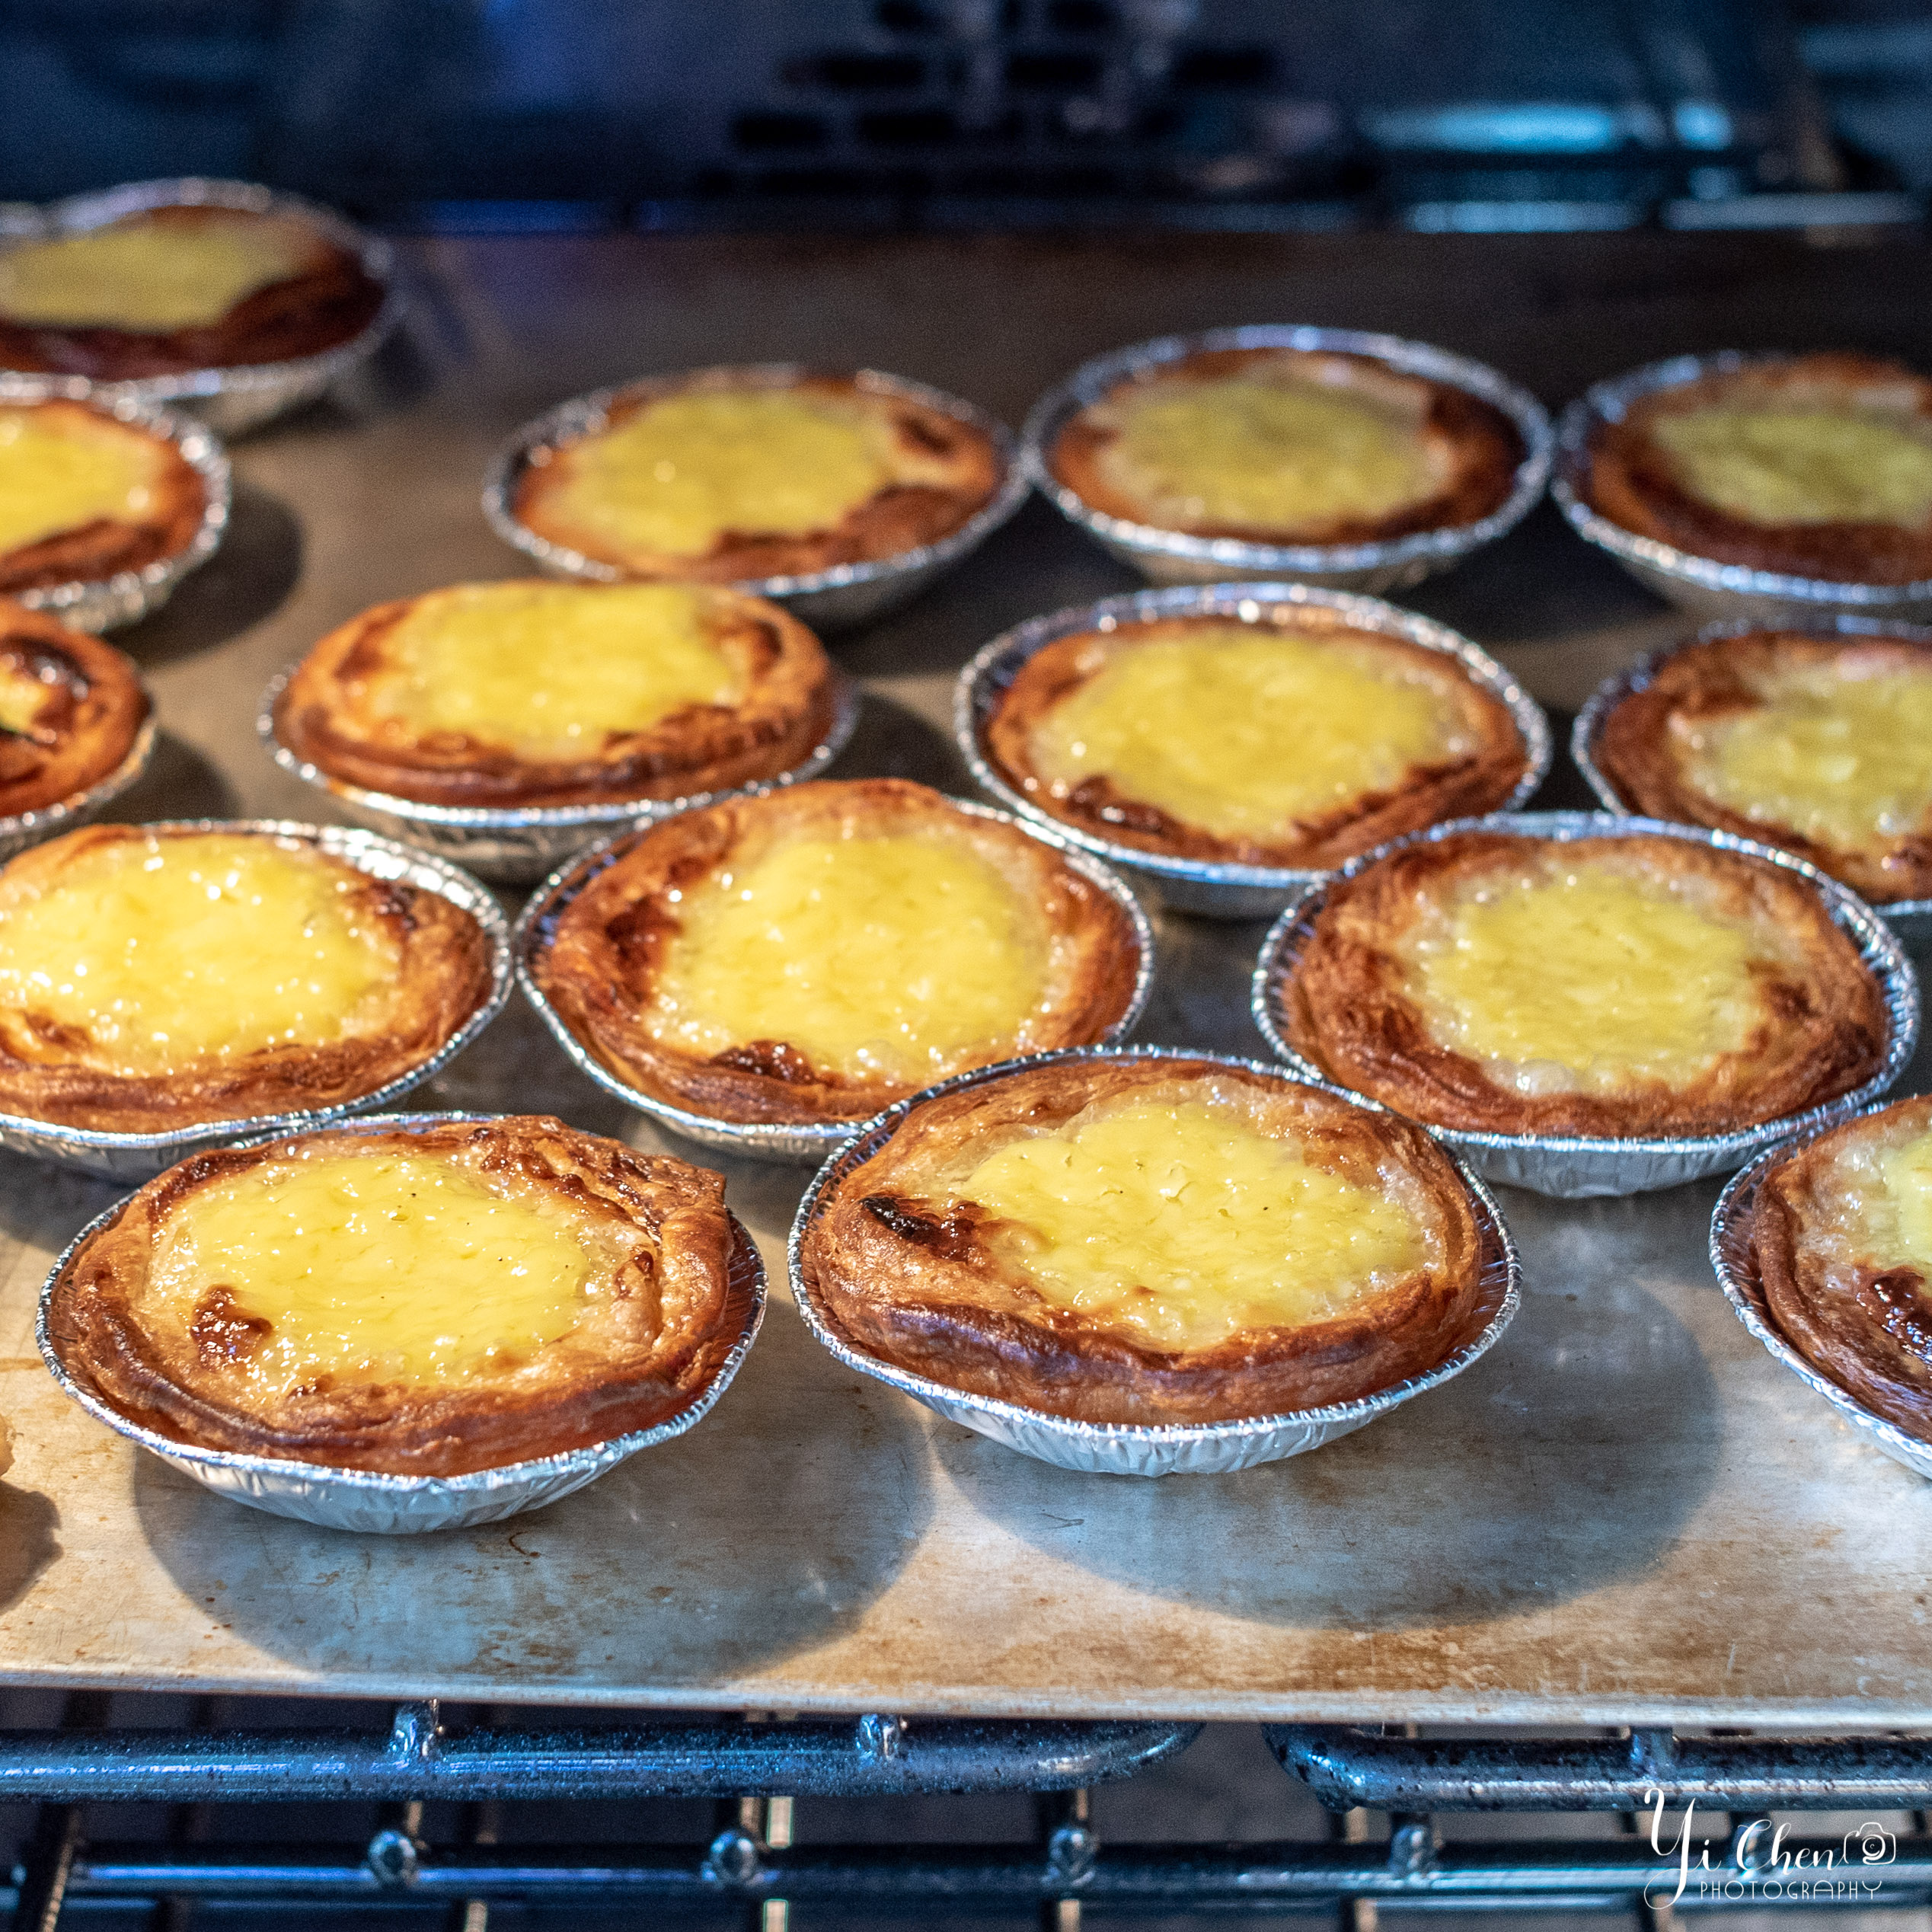 Pastel de Nata Tins (Egg Tart Tins) - Made in Portugal Out of Galvanized Steel - Includes Pastéis de Nata Print Postcard and Downloadable Recipe - Set